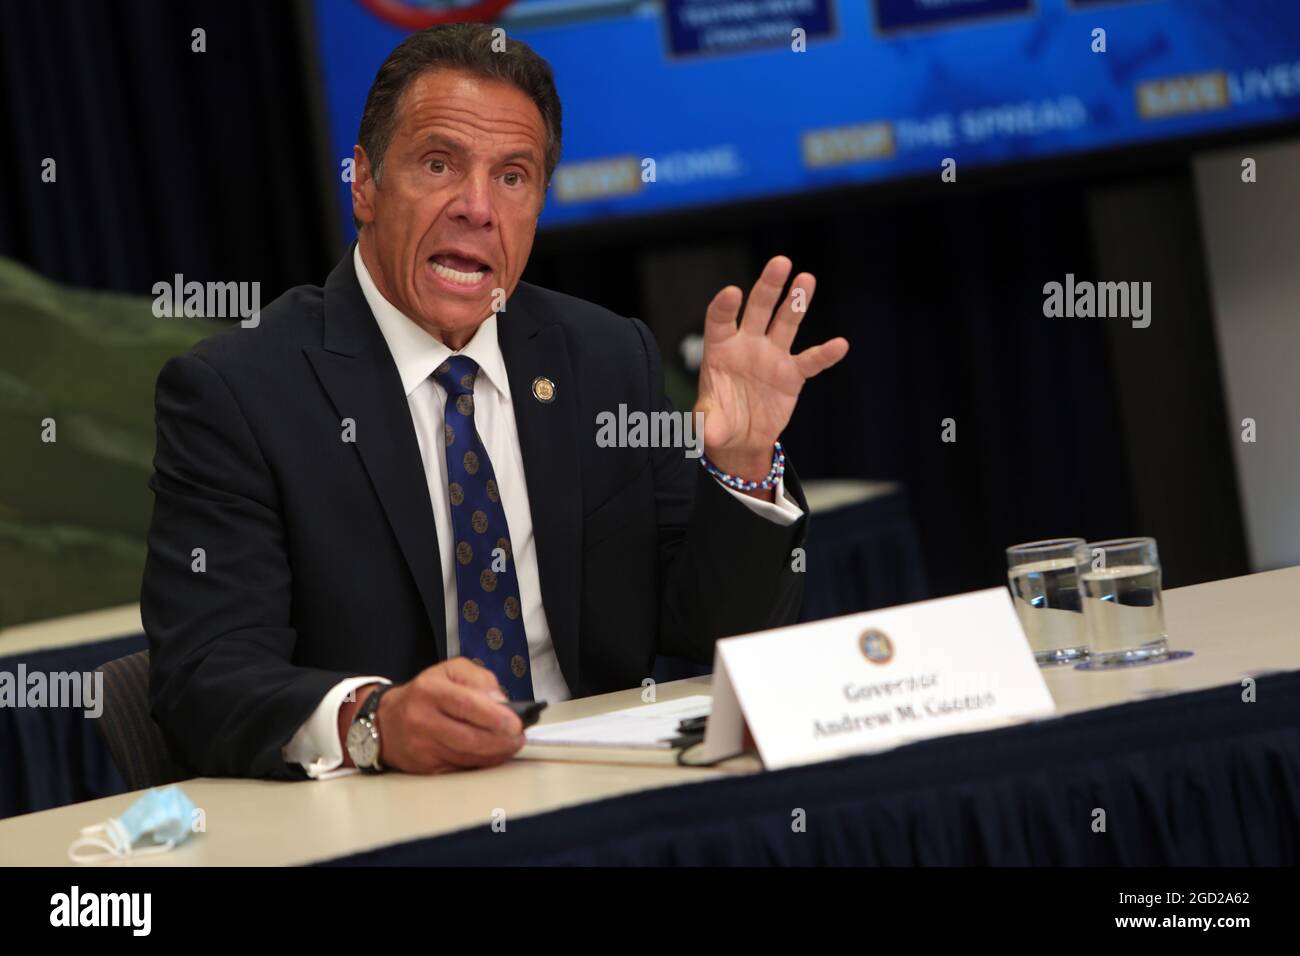 **FILE PHOTO** NY Governor Andrew Cuomo Resigns Amid Harassment Scandal. NEW YORK, NY - JULY 6: New York State Governor Andrew Cuomo updates New Yorkers and announces mid-Hudson region to enter phase IV of reopening tomorrow and calls on President Trump to acknowledge that COVID-19 exists and is a problem. Cuomo also confirms 518 additional coronavirus cases in New York State at the Governor's Office in New York City on July 6, 2020. Credit: mpi43/MediaPunch Stock Photo